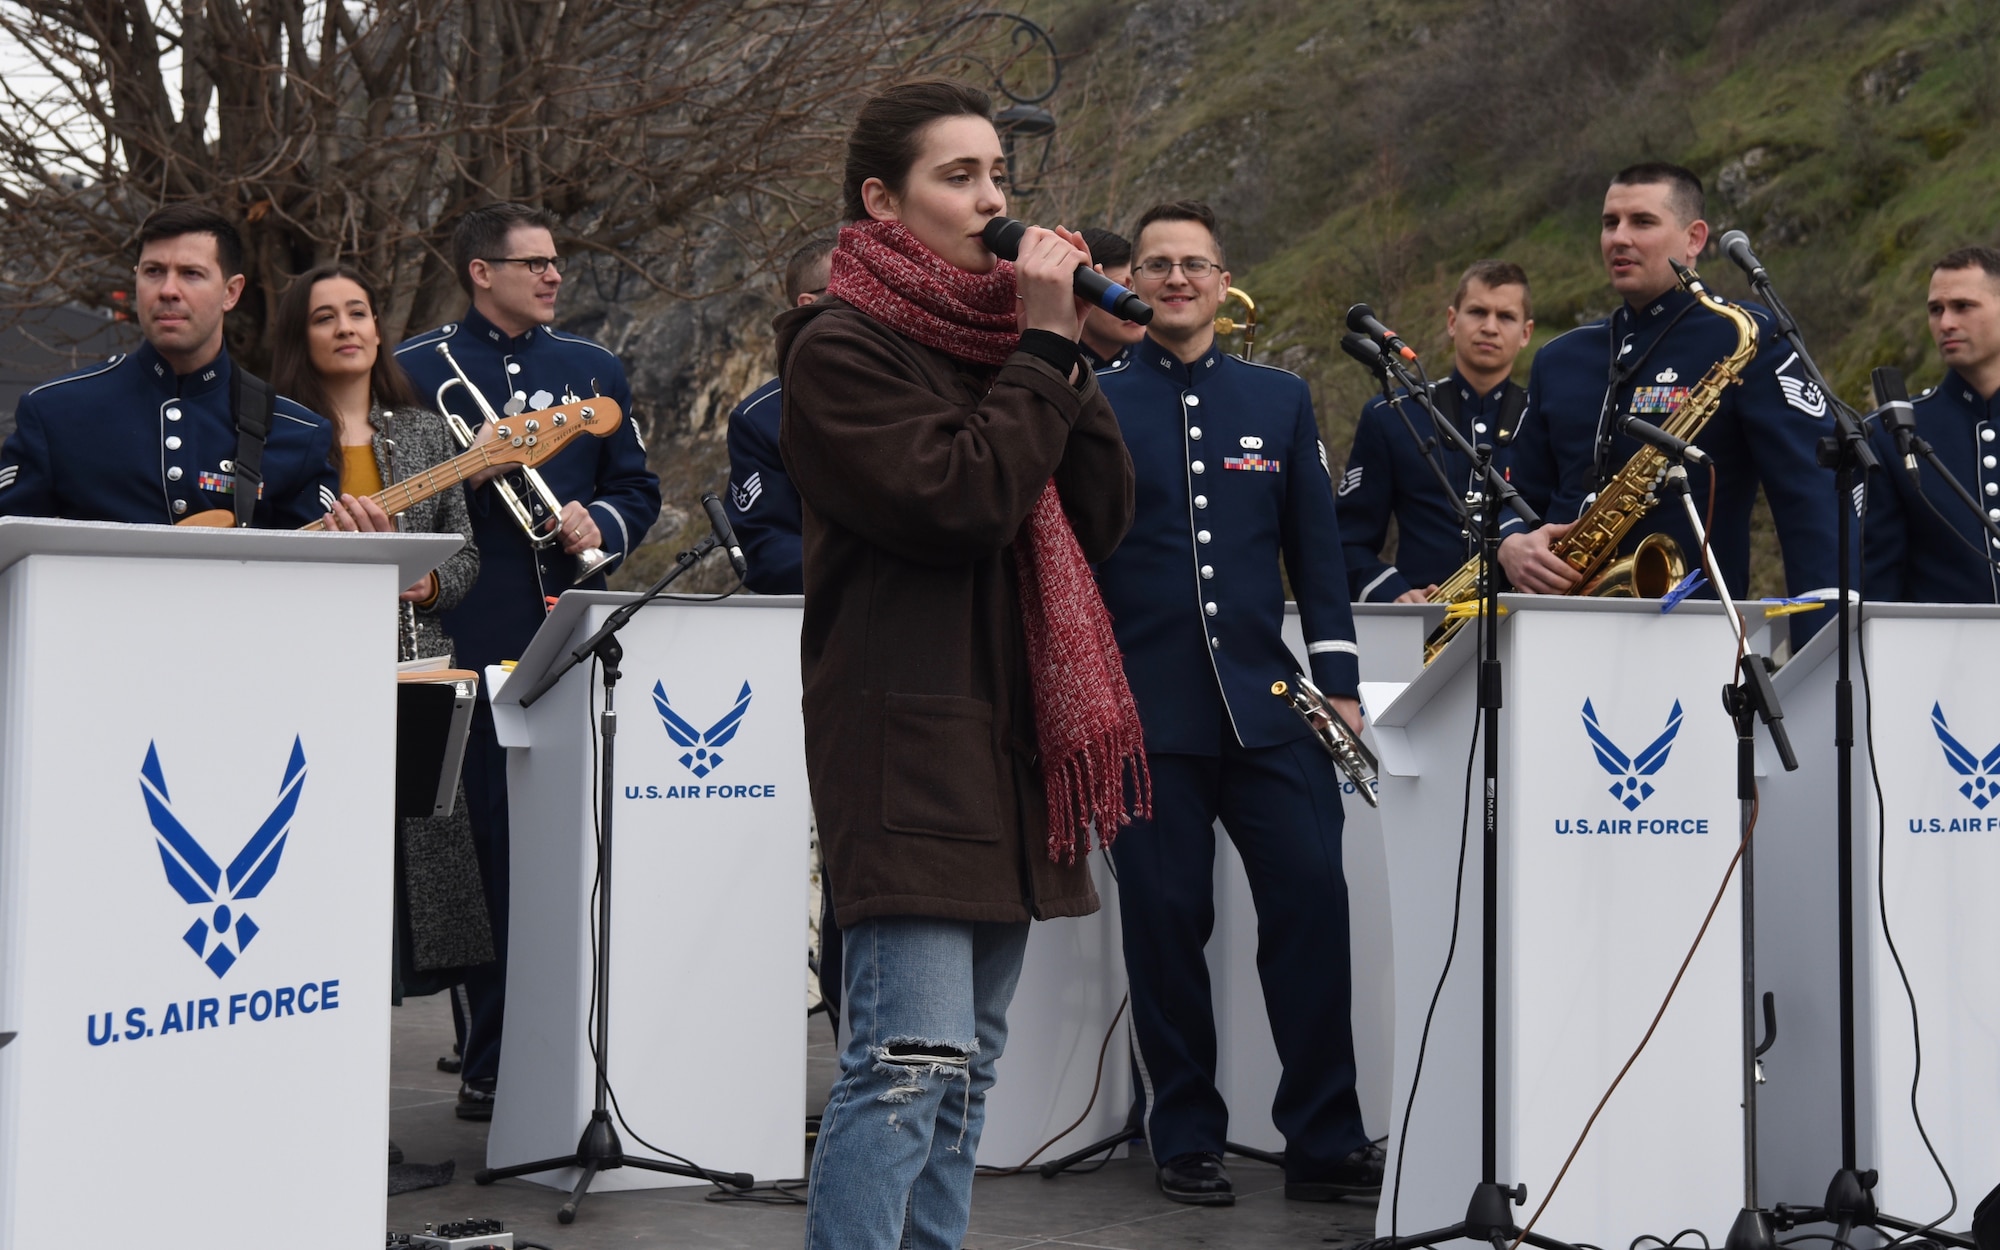 The U.S. Air Forces in Europe Band performs in Prizren, Kosovo, in celebration of the country’s 10th anniversary of independence, Feb. 18, 2018. During the performance, the band brought onstage Kosovar musician Denisa Sadiku, a vocalist who excelled on the show “The Voice Albania,” and Anda Gjini, a flute player in her final semester studying music at the University of Pristina. (U.S. Air Force photo by Maj. Tristan Hinderliter)